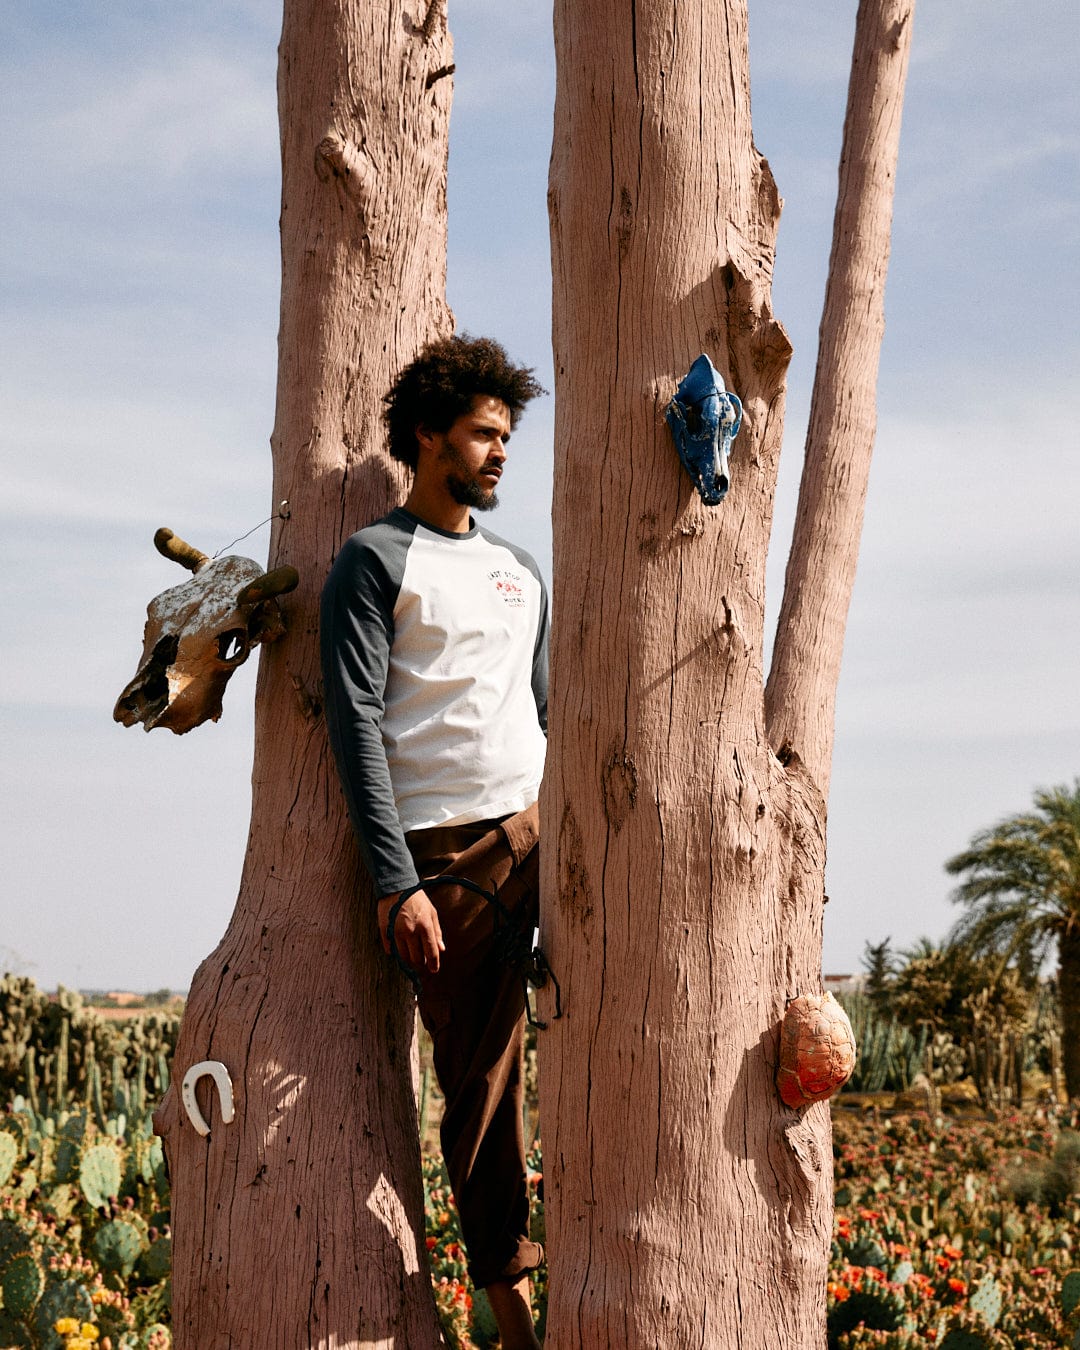 A man with curly hair stands between two rugged trees decorated with various objects, in a sunlit desert garden, wearing a Last Stop - Long Sleeve Raglan - White by Saltrock.